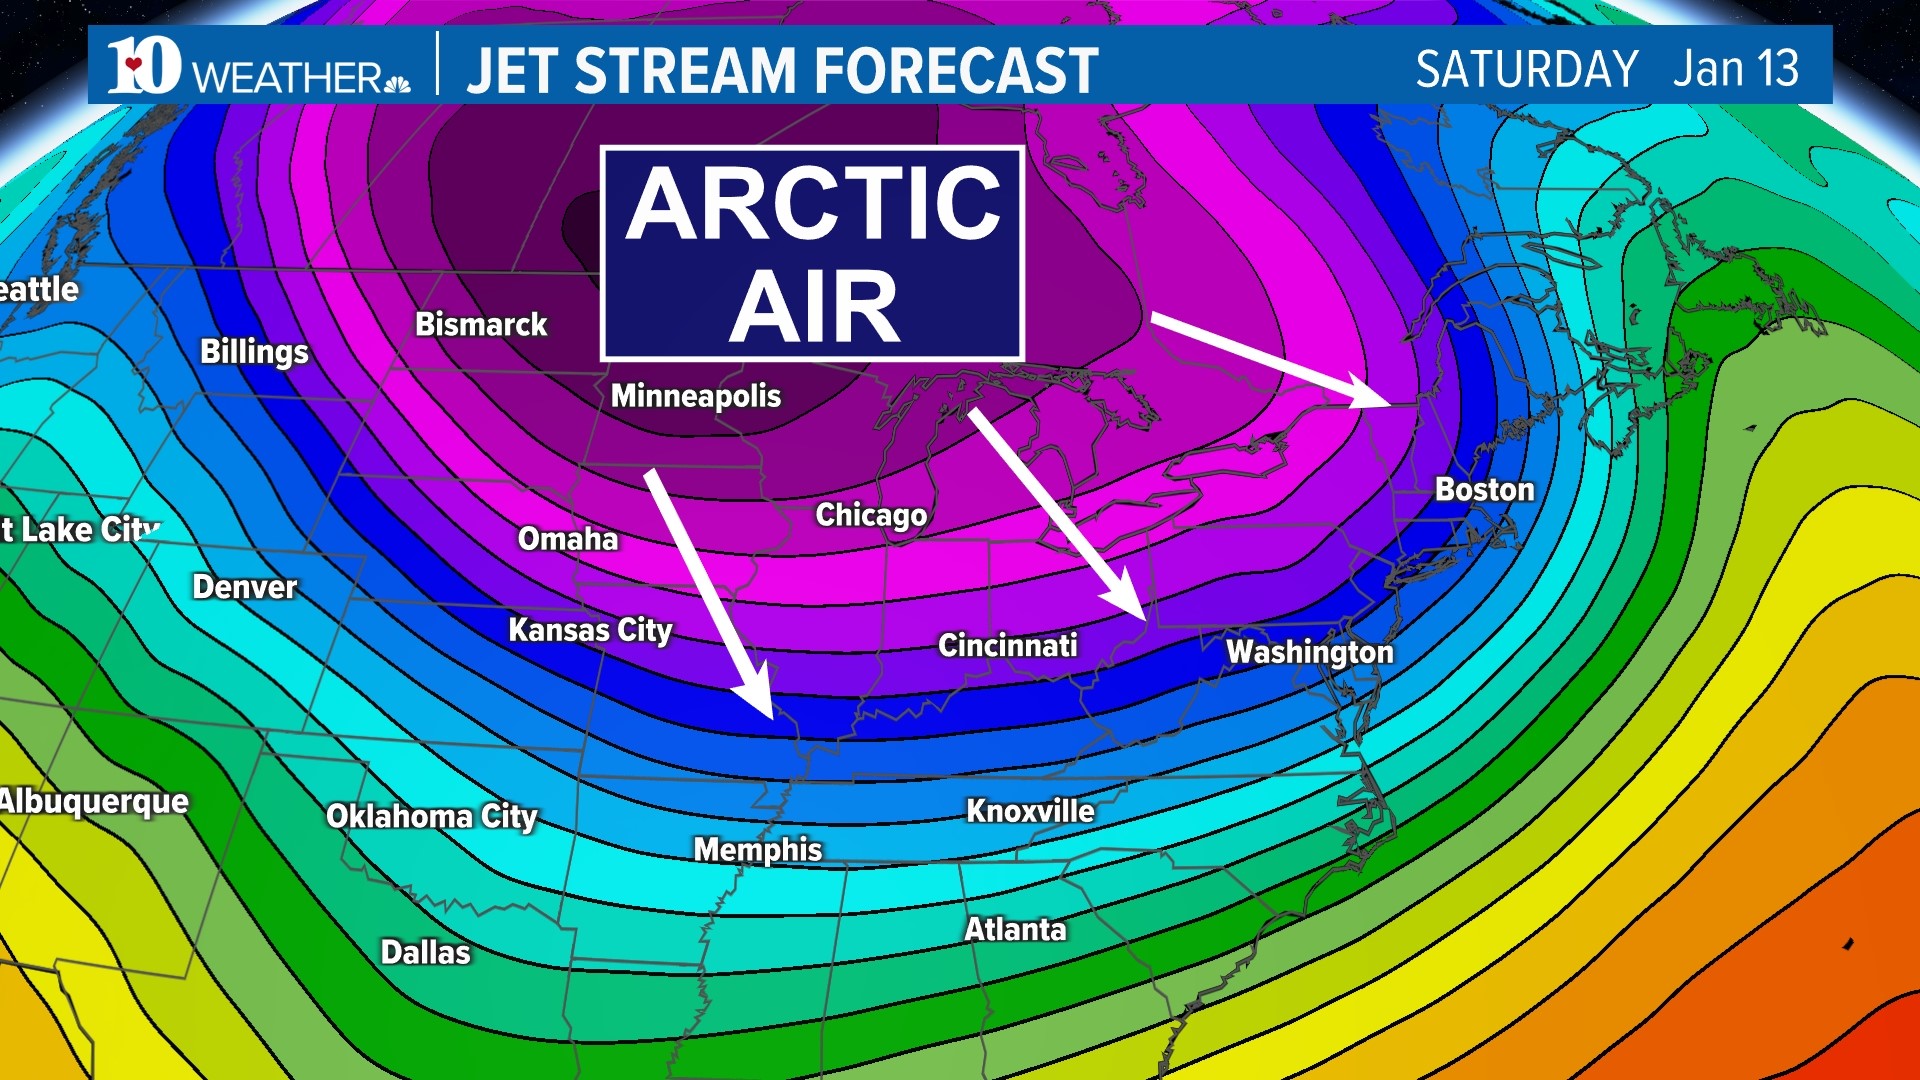 Ready or not, here it comes! An Arctic Outbreak will allow frigid air to pour into the United States by this weekend.